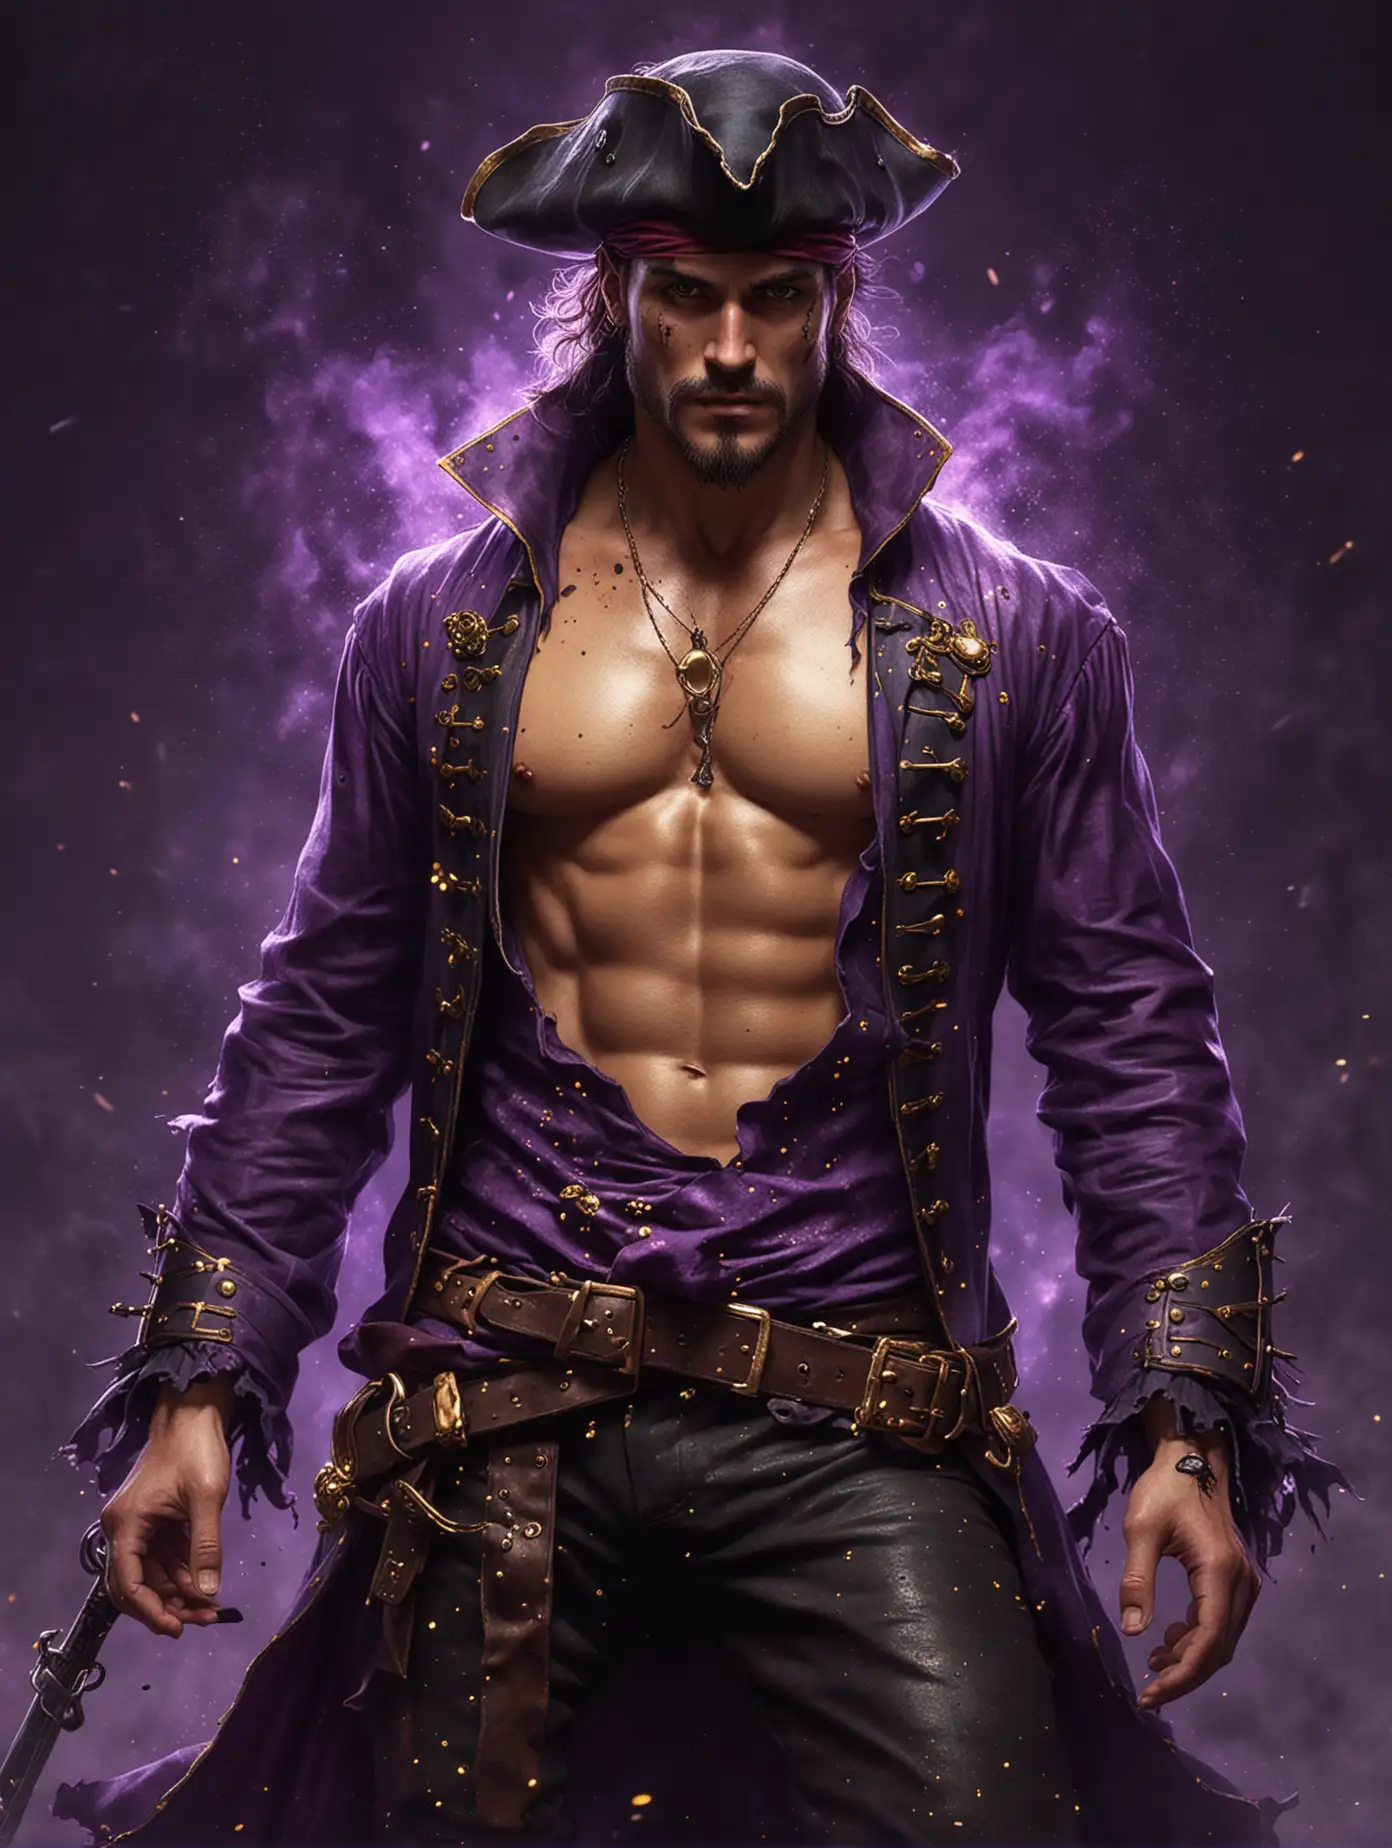 Handsome Pirate Man in Unbuttoned Attire amidst Black and Purple Fog with Gold Sparks